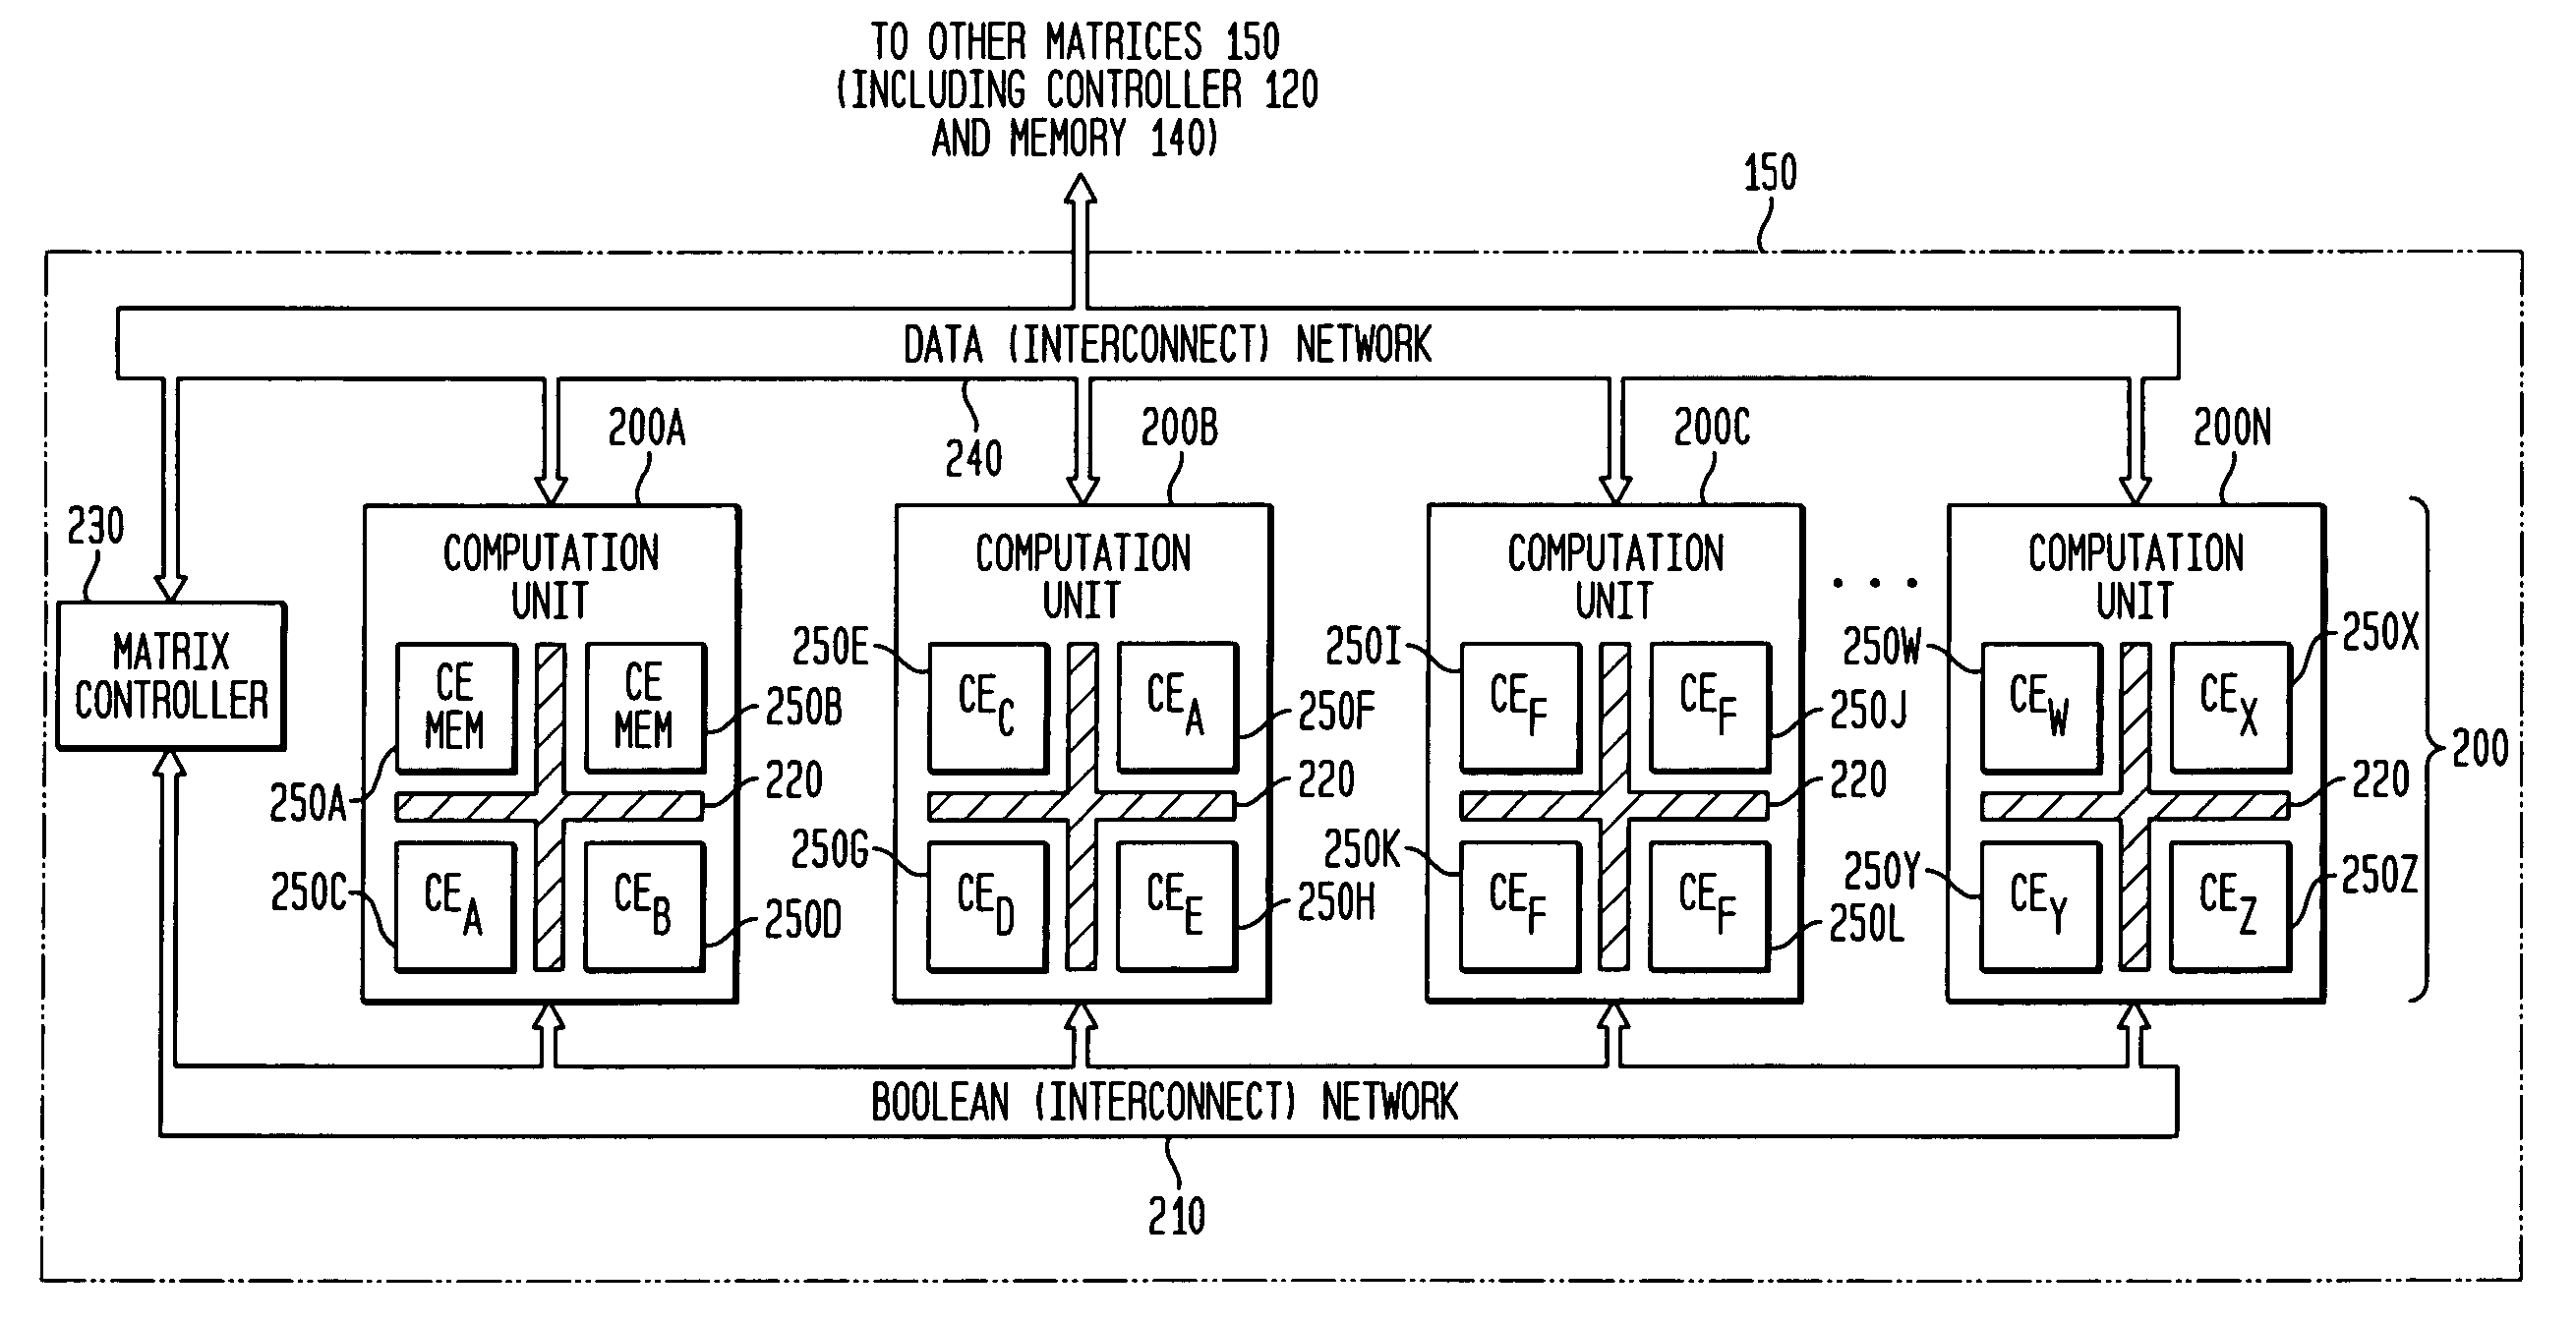 Adaptive integrated circuitry with heterogeneous and reconfigurable matrices of diverse and adaptive computational units having fixed, application specific computational elements